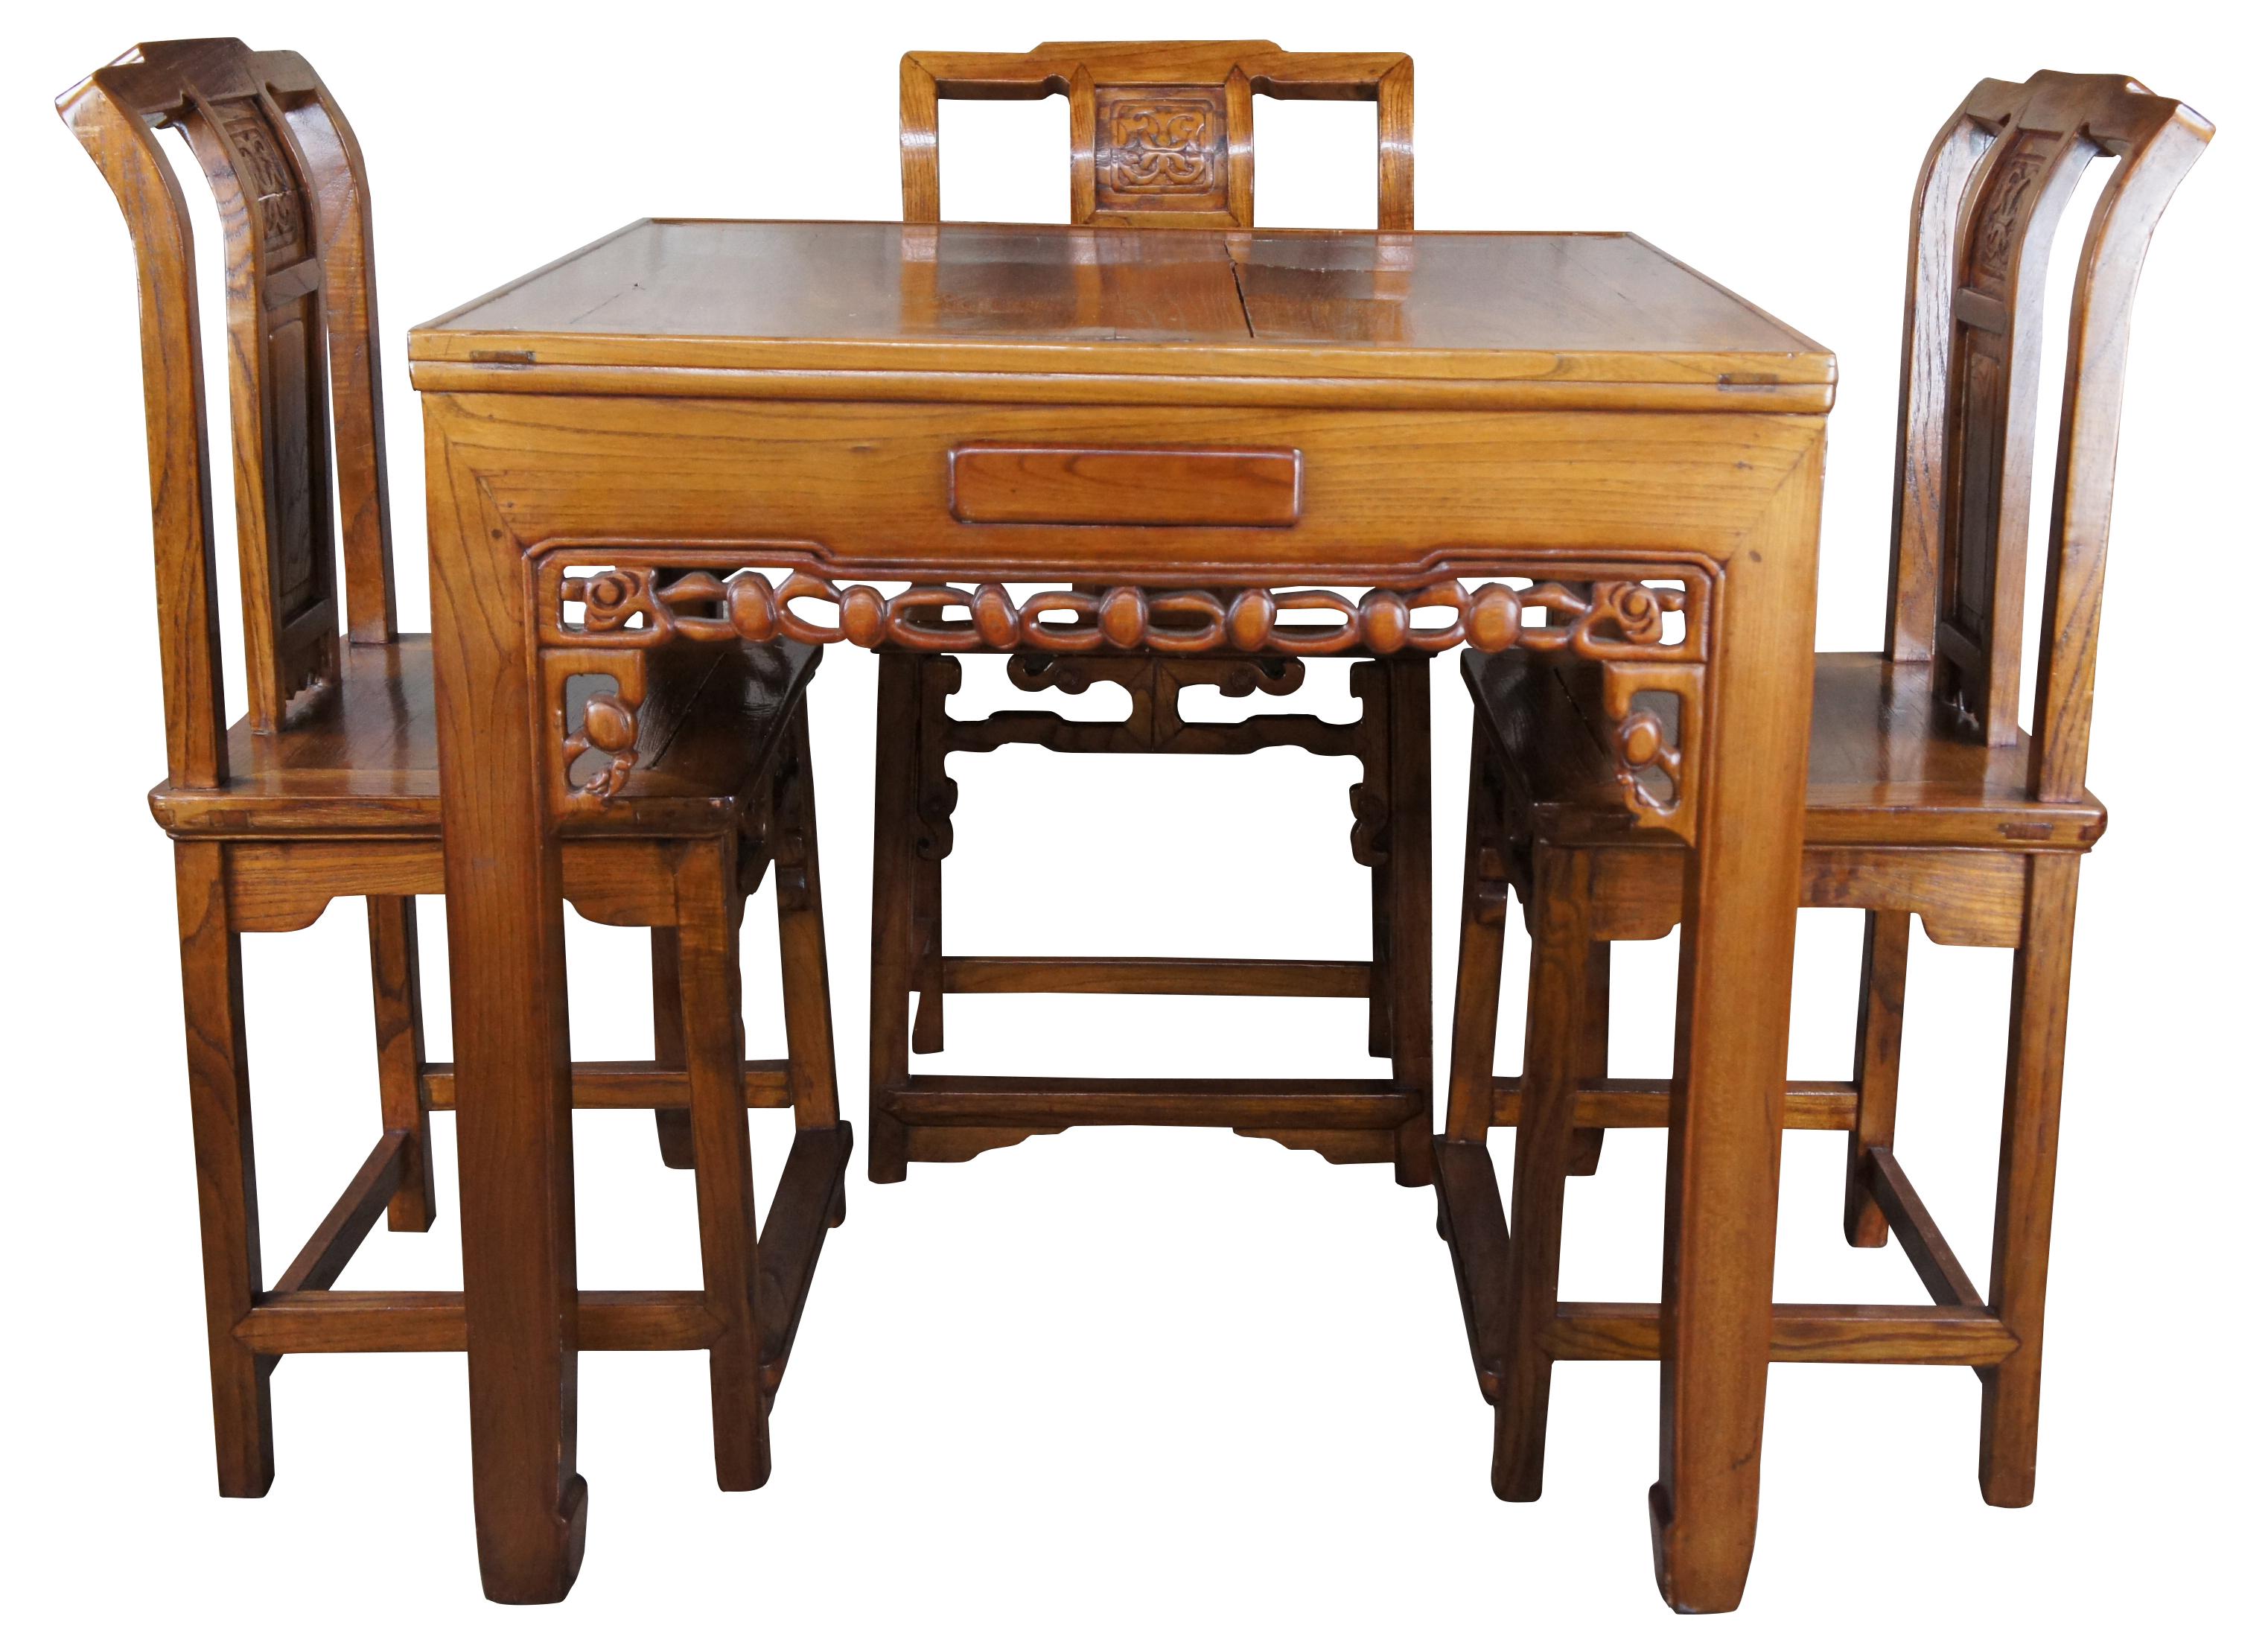 A beautiful Japanese solid elm Mahjong table and 4 chairs.. Purchased in Japan during the last quarter of the 20th century. Table features Square form with carved and pierced apron. Includes a dovetailed drawer along each side and a glass top.